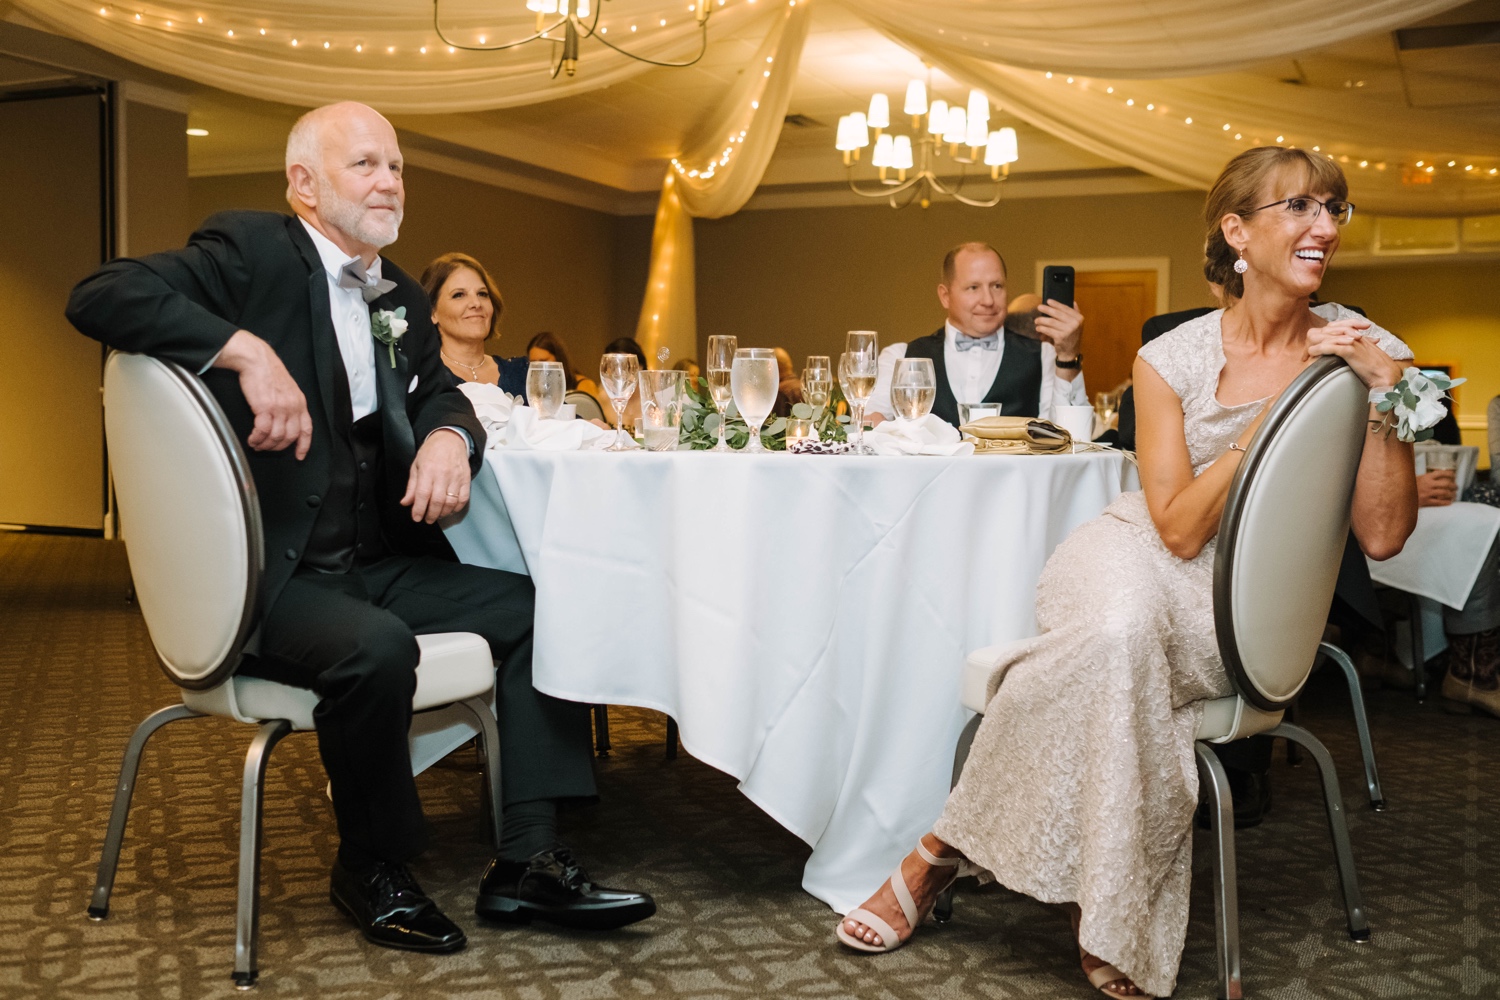 guests listening to speeches at minnesota valley country club wedding reception